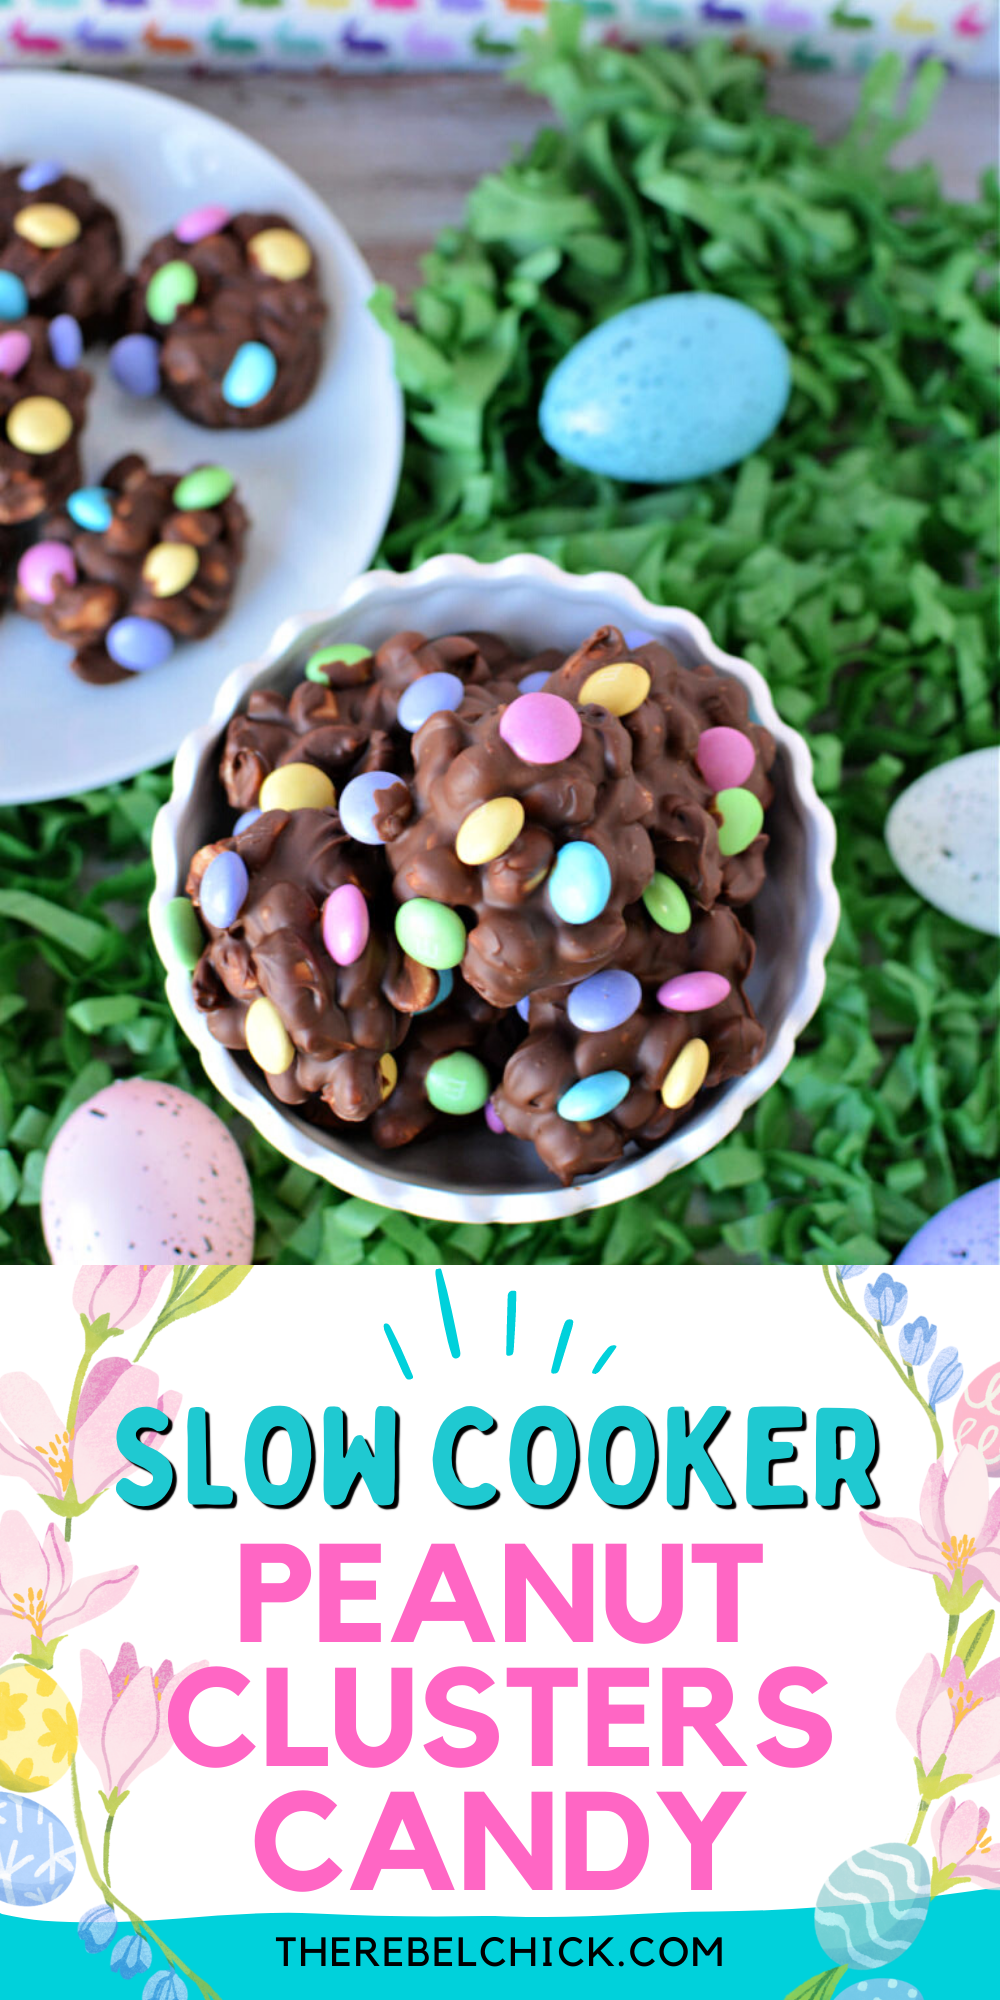 Slow Cooker Peanut Clusters Candy